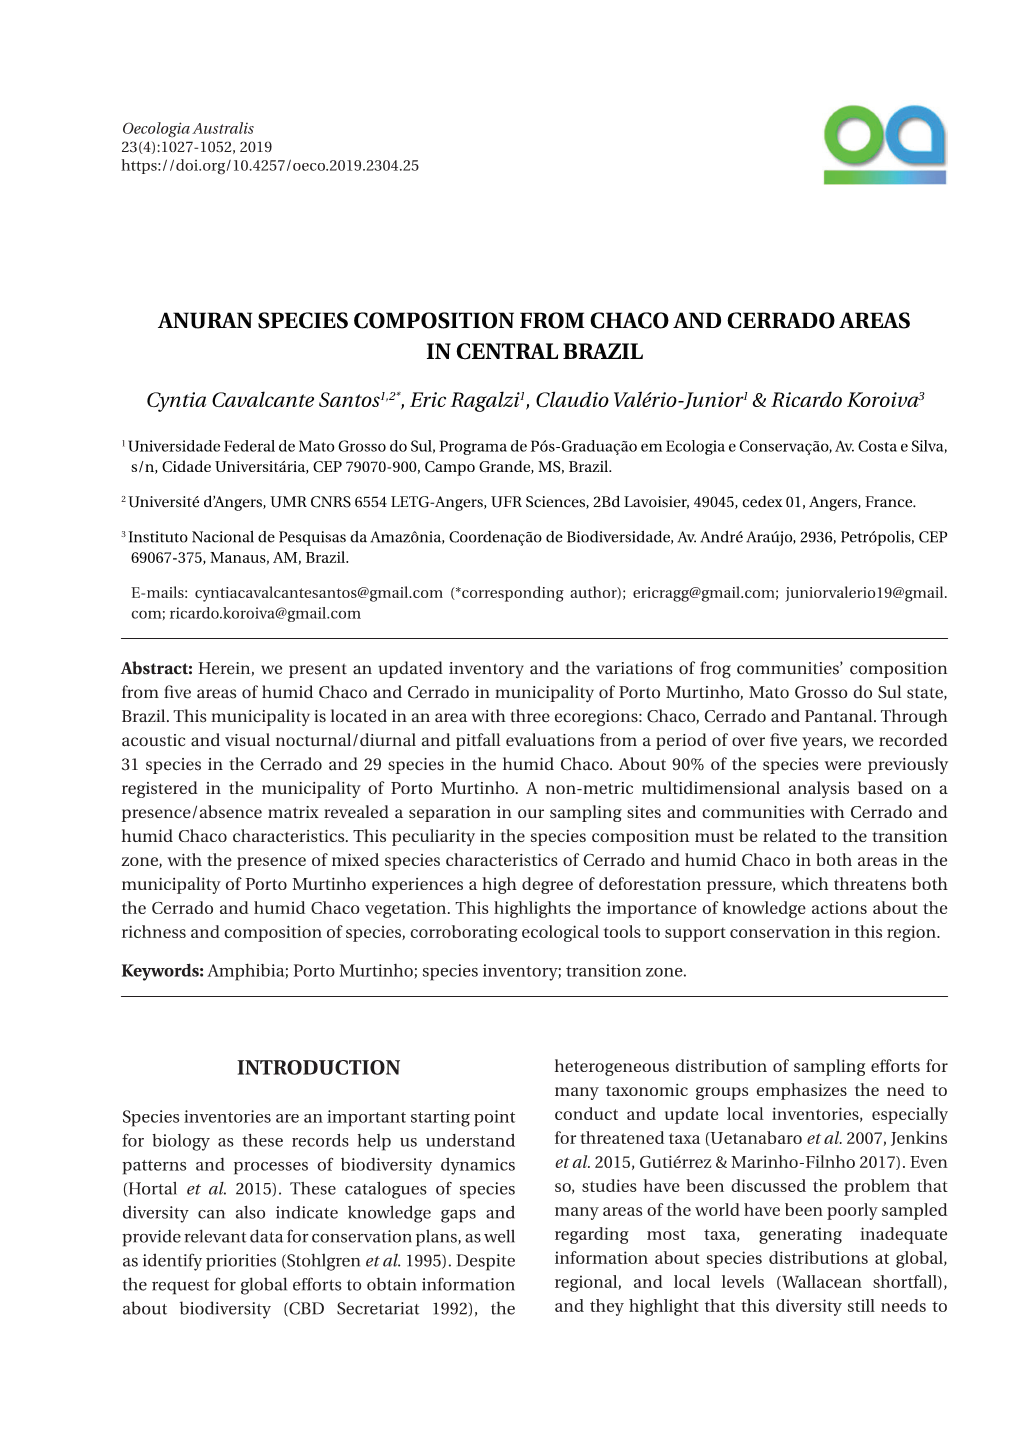 Anuran SPECIES COMPOSITION from CHACO and CERRADO AREAS in CENTRAL Brazil